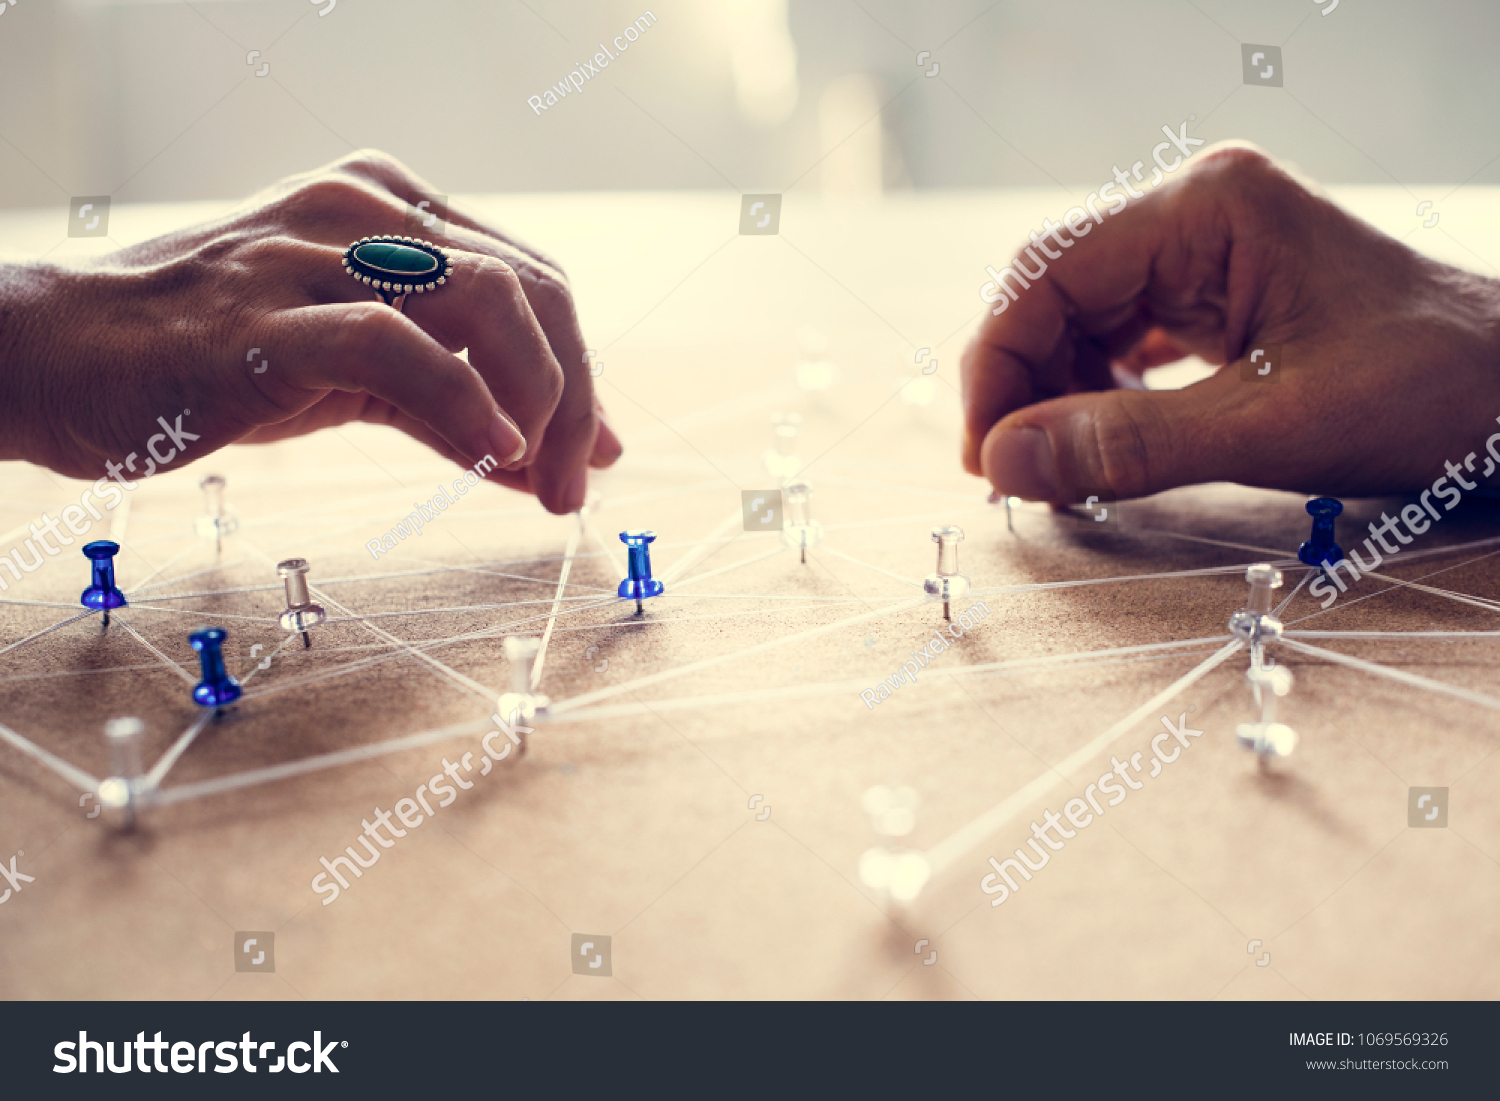 Hands holding connecting pin network #1069569326